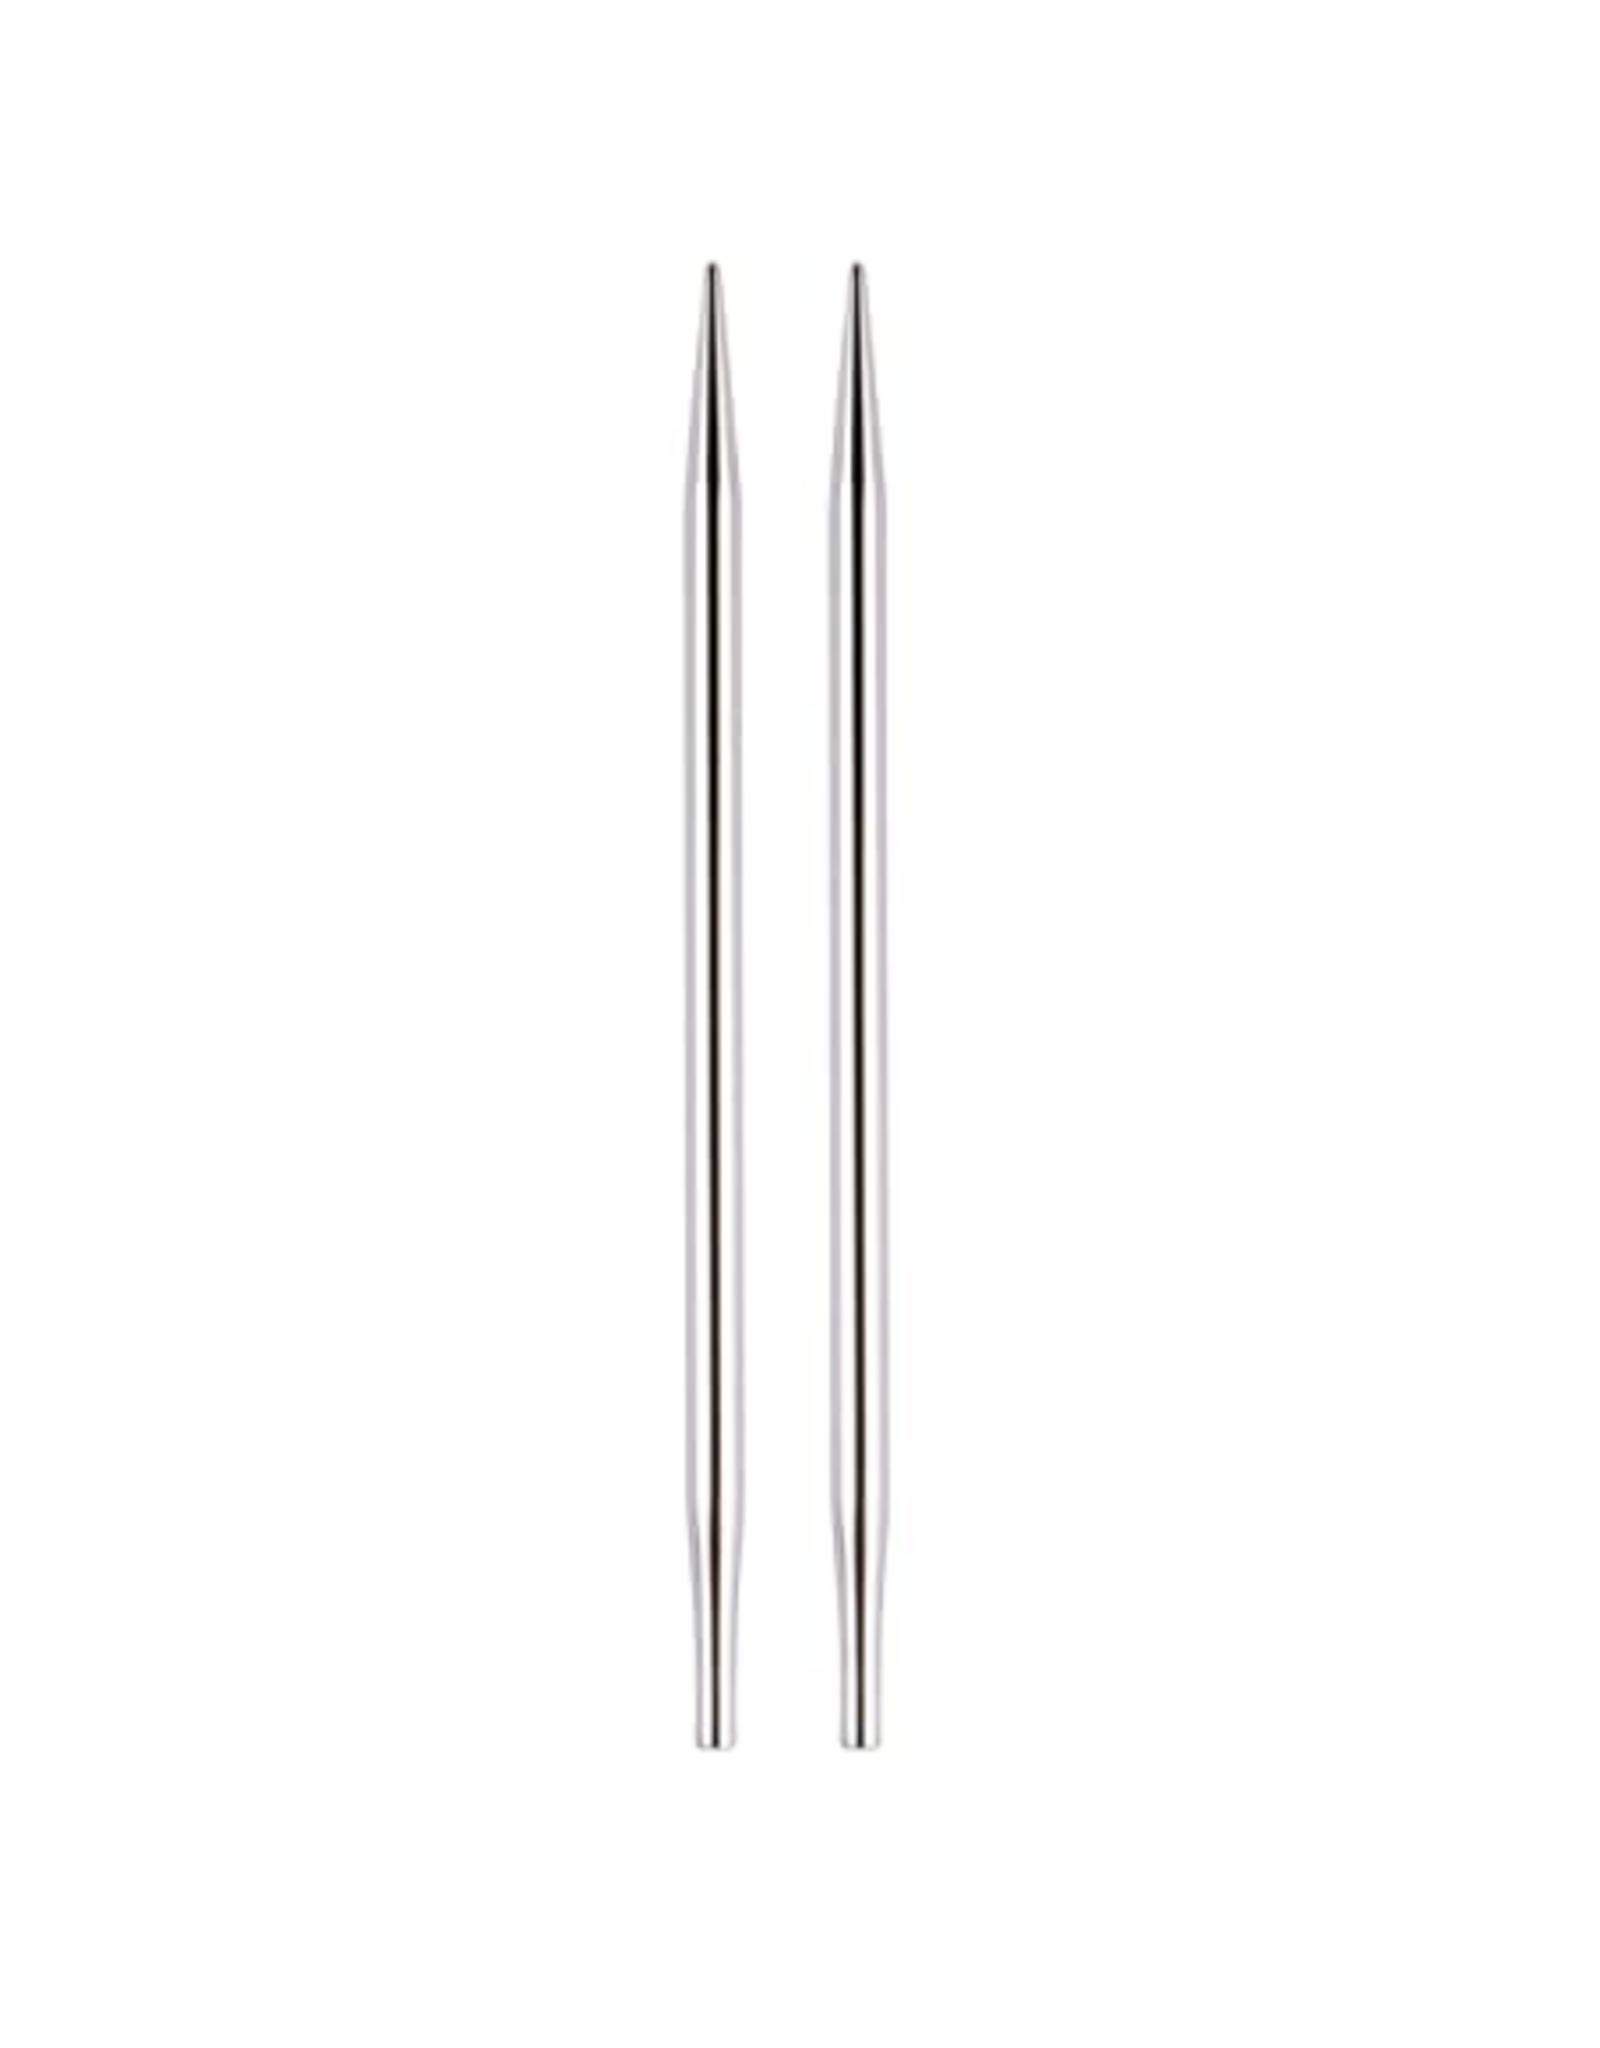 Nova size US 8 interchangeable needle tips for 24" cords and up.